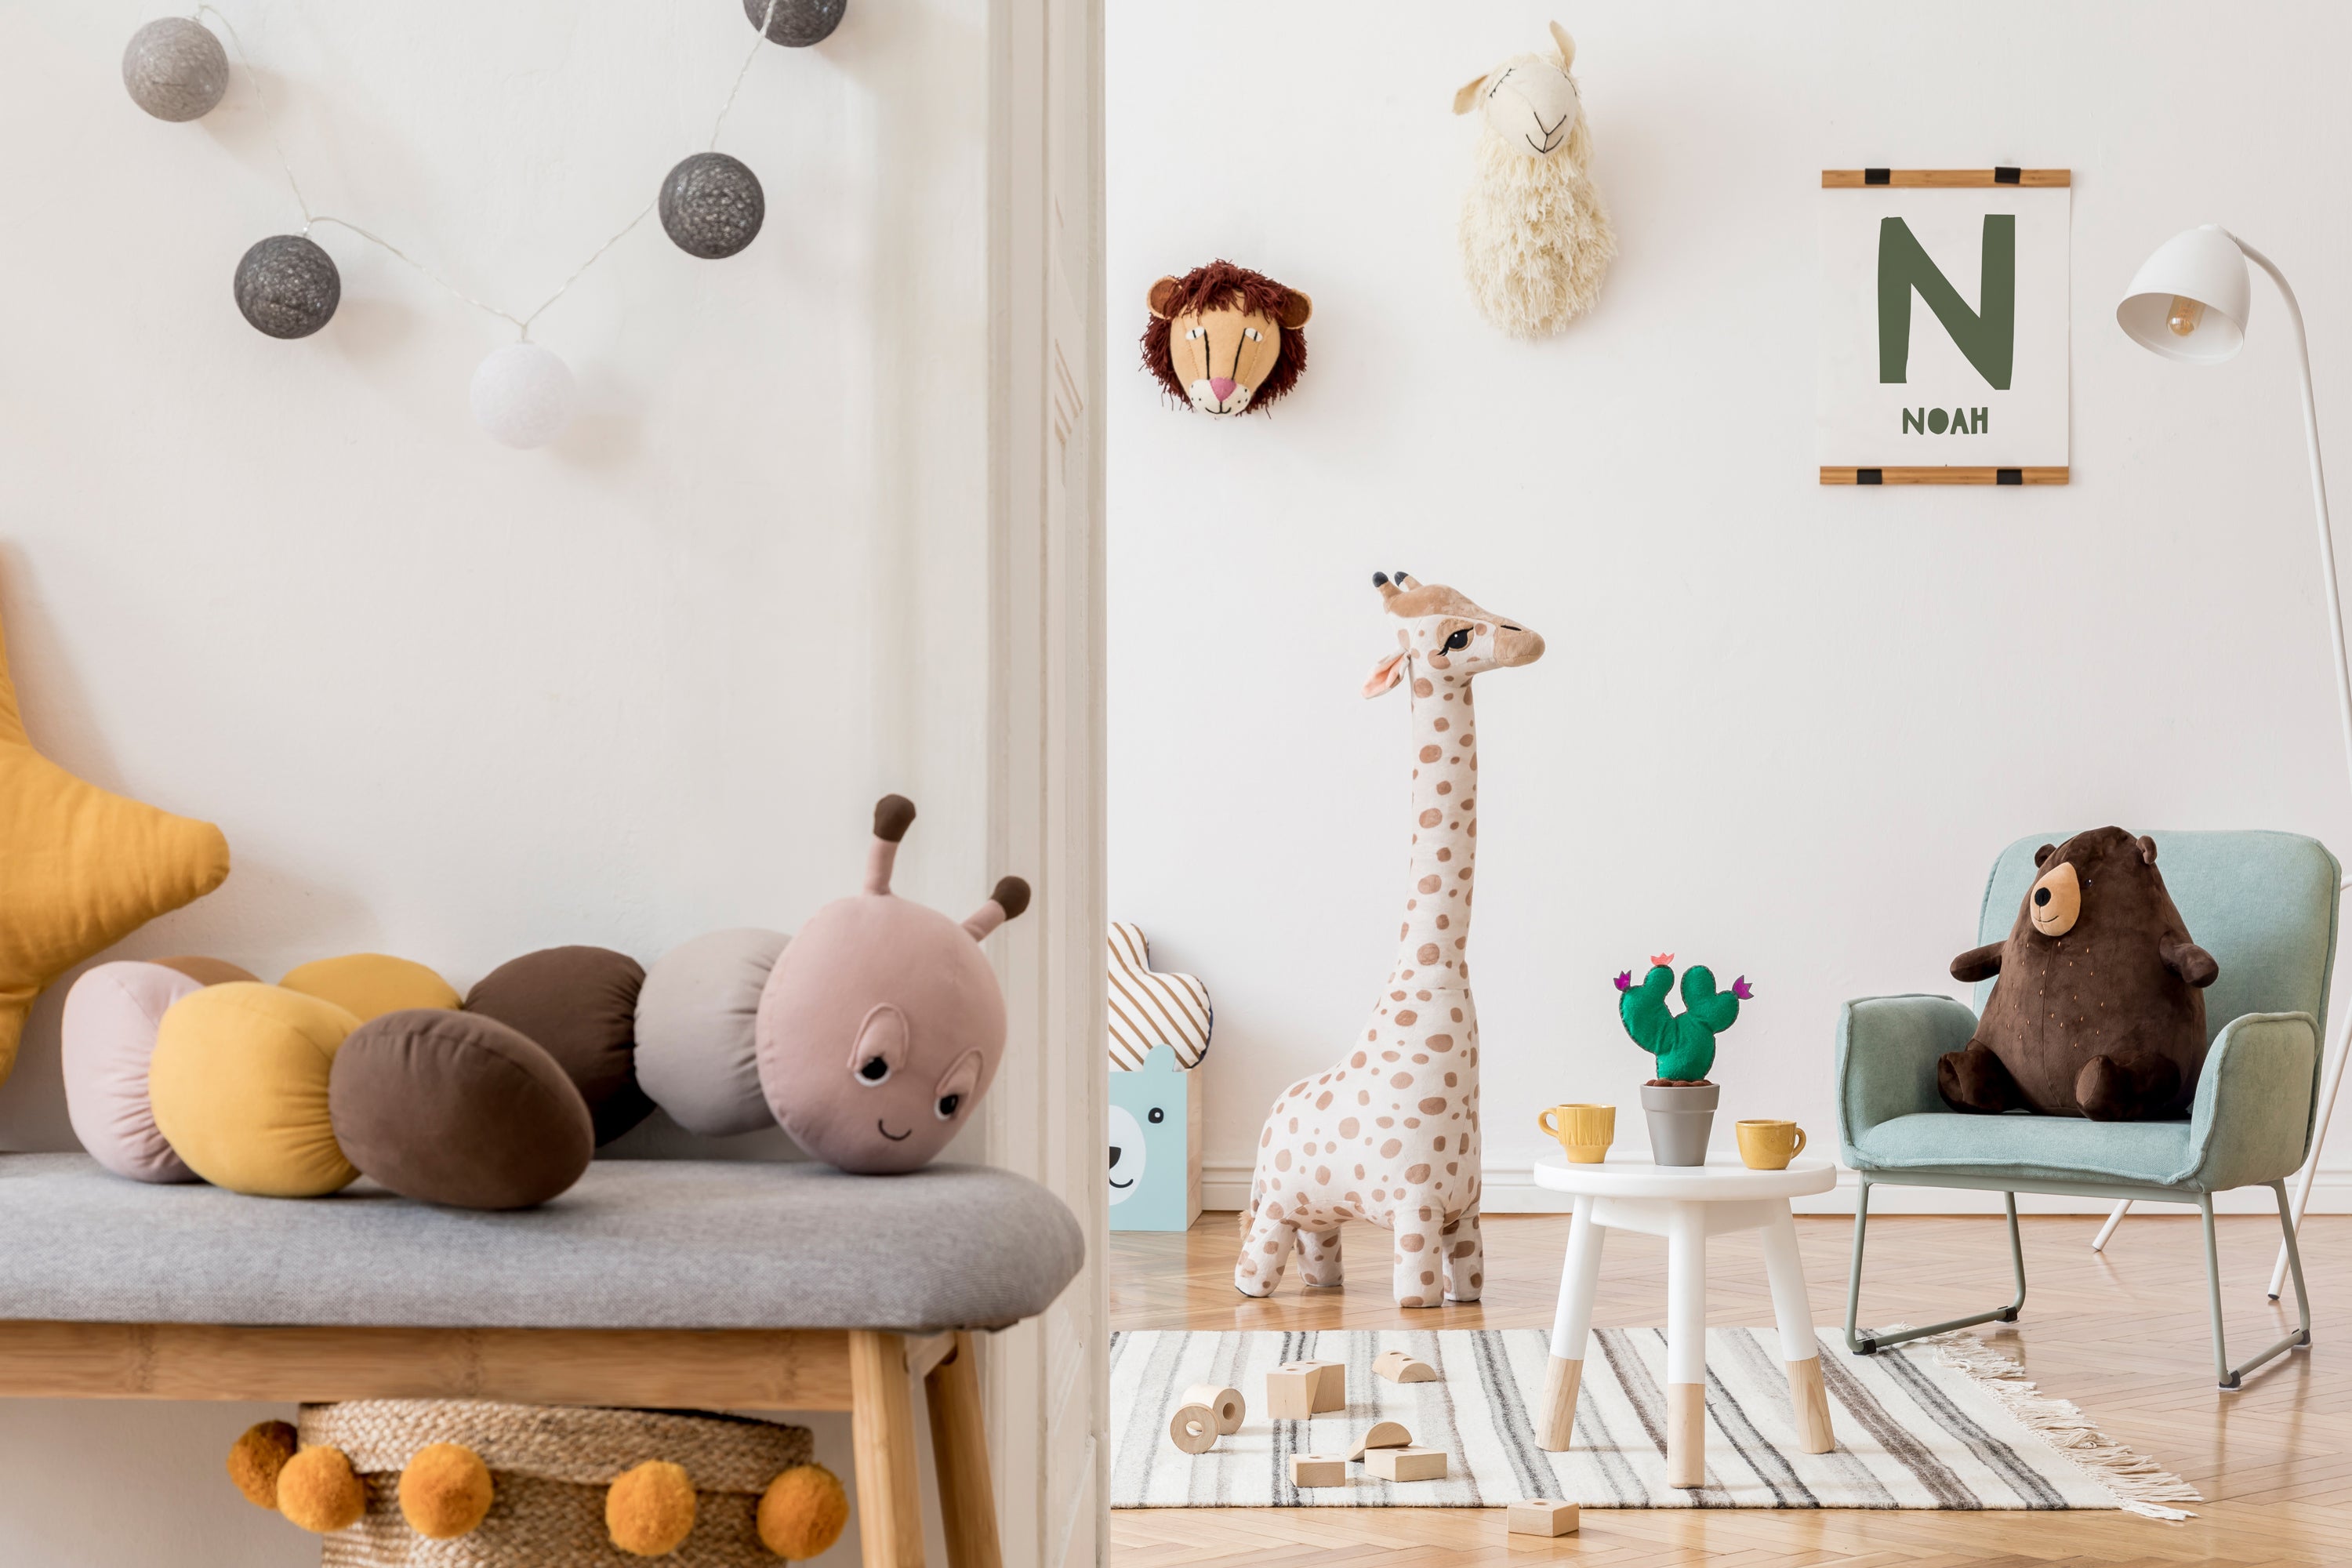 How To Choose Wall Art for Your Kid's Room